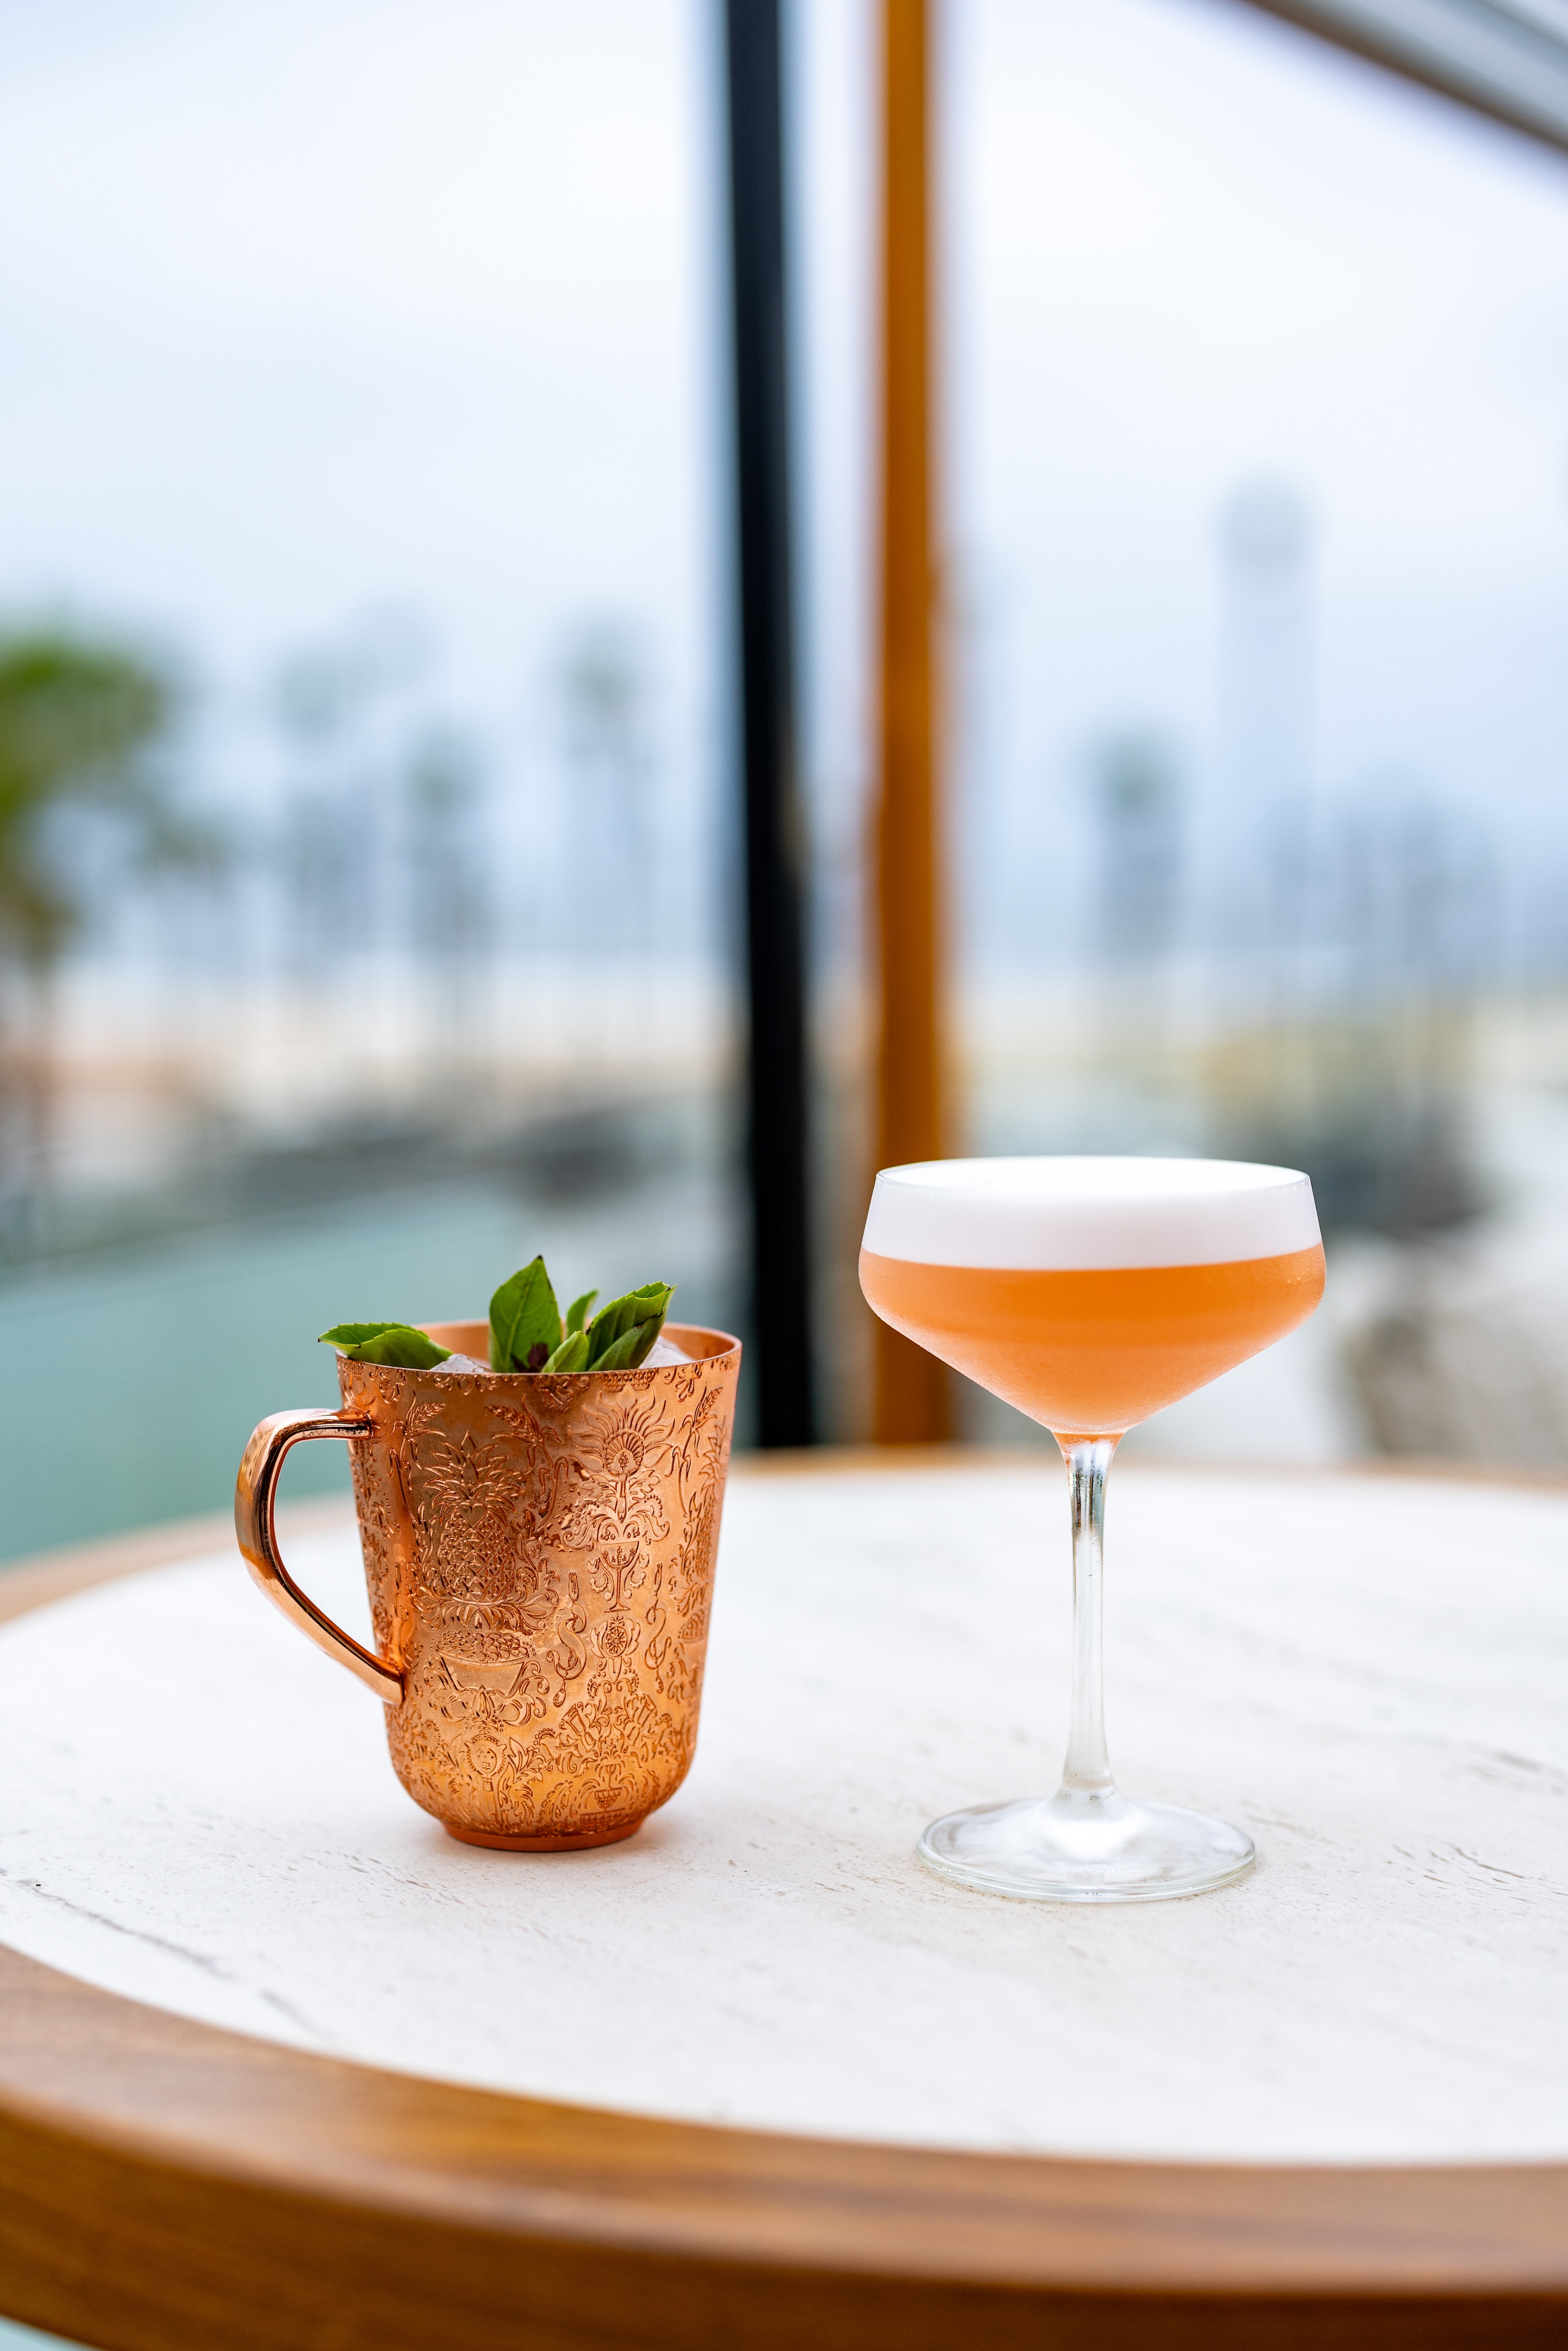 A copper mug filled with a mint garnish and a frothy cocktail in a coupe glass sit on a round marble table, capturing the essence of Happy Hour in the blurred outdoor background.